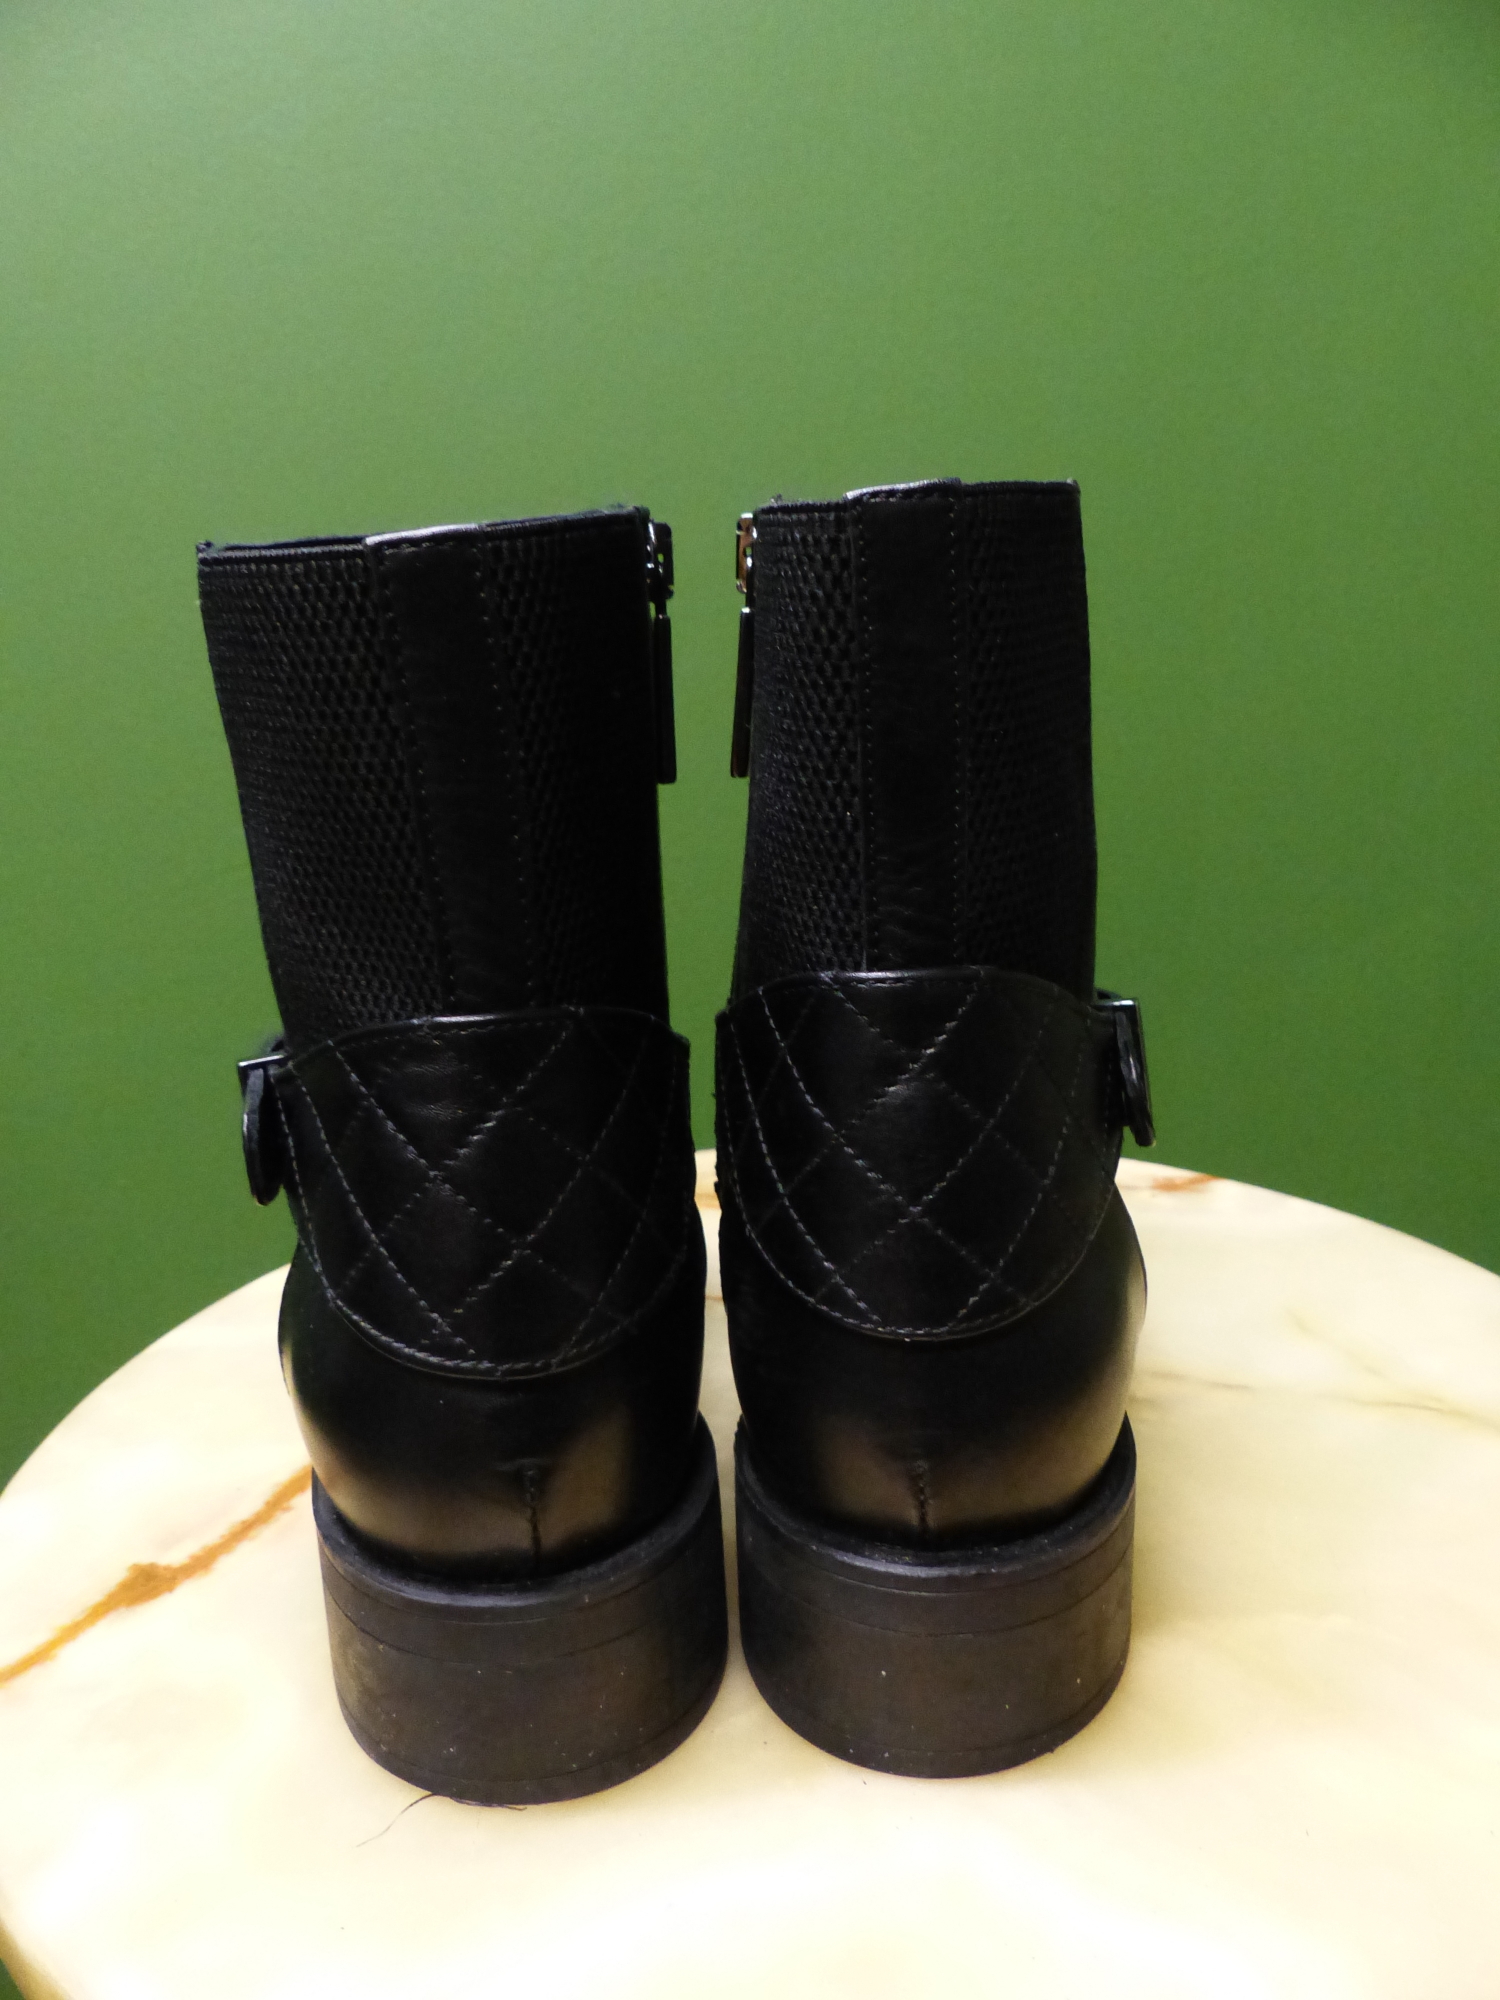 BOOTS. RUSSELL & BROMLEY BLACK UK SIZE 39. (WITH BOX) - Image 3 of 5